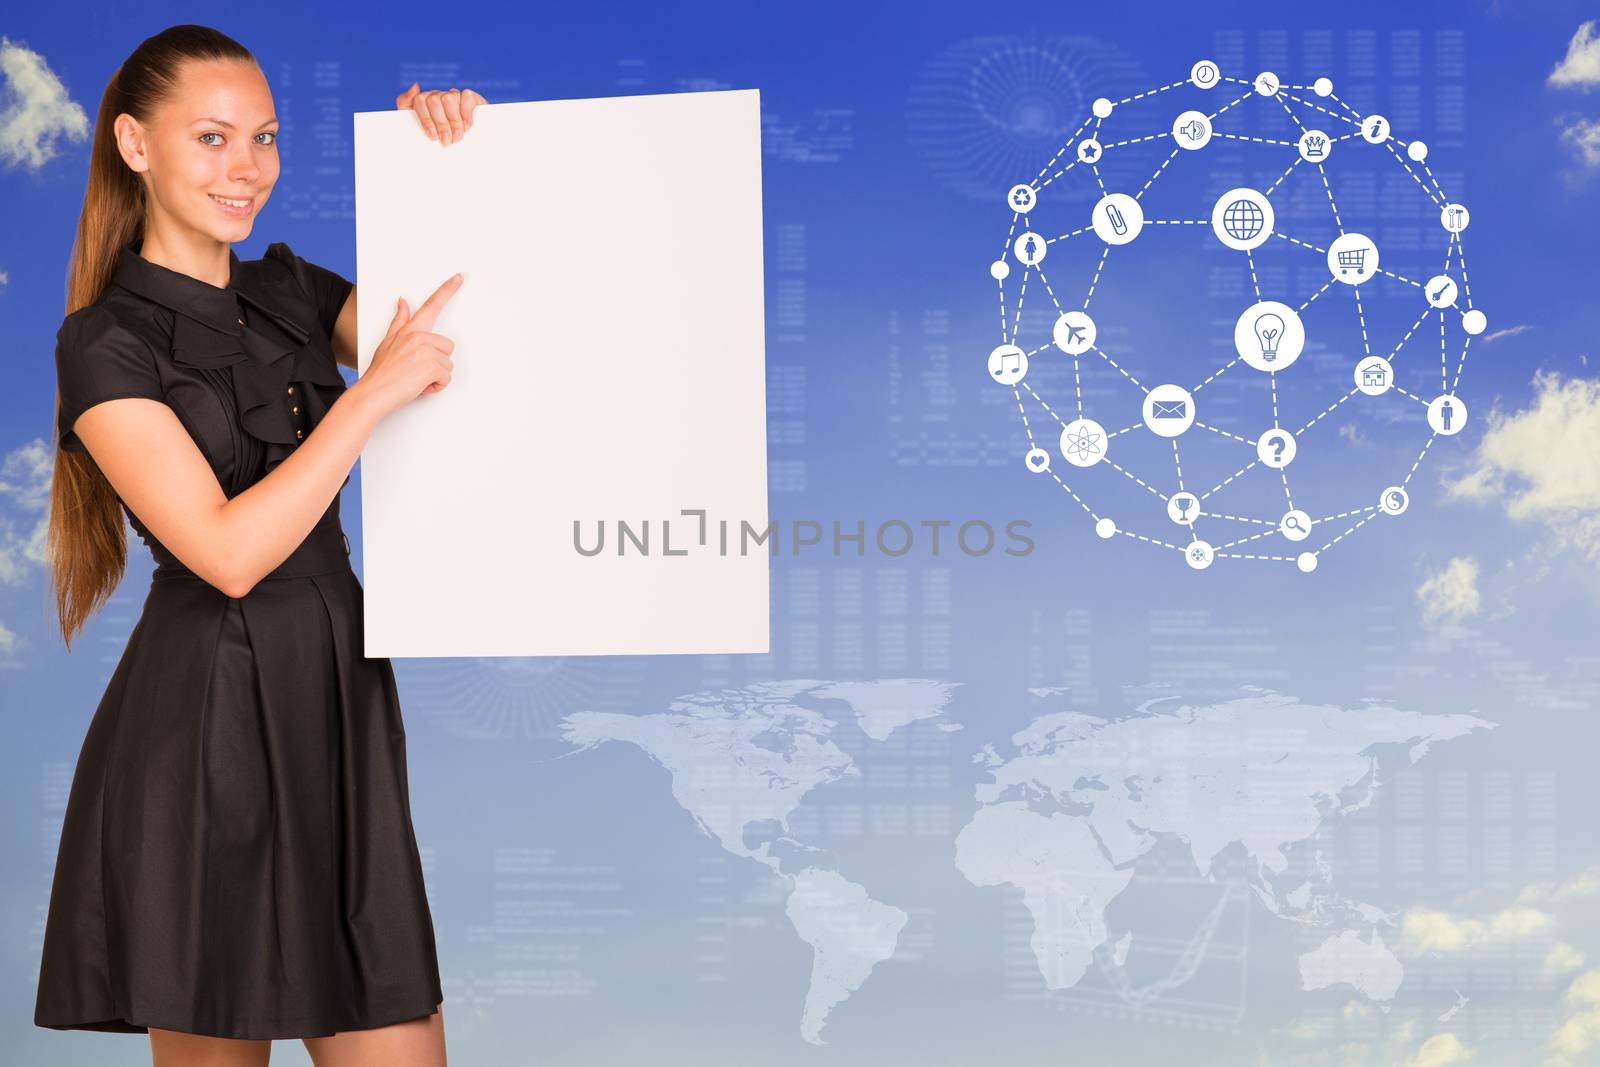 Beautiful businesswoman in dress smiling and holding empty paper sheet. World map, graphs and texts as backdrop